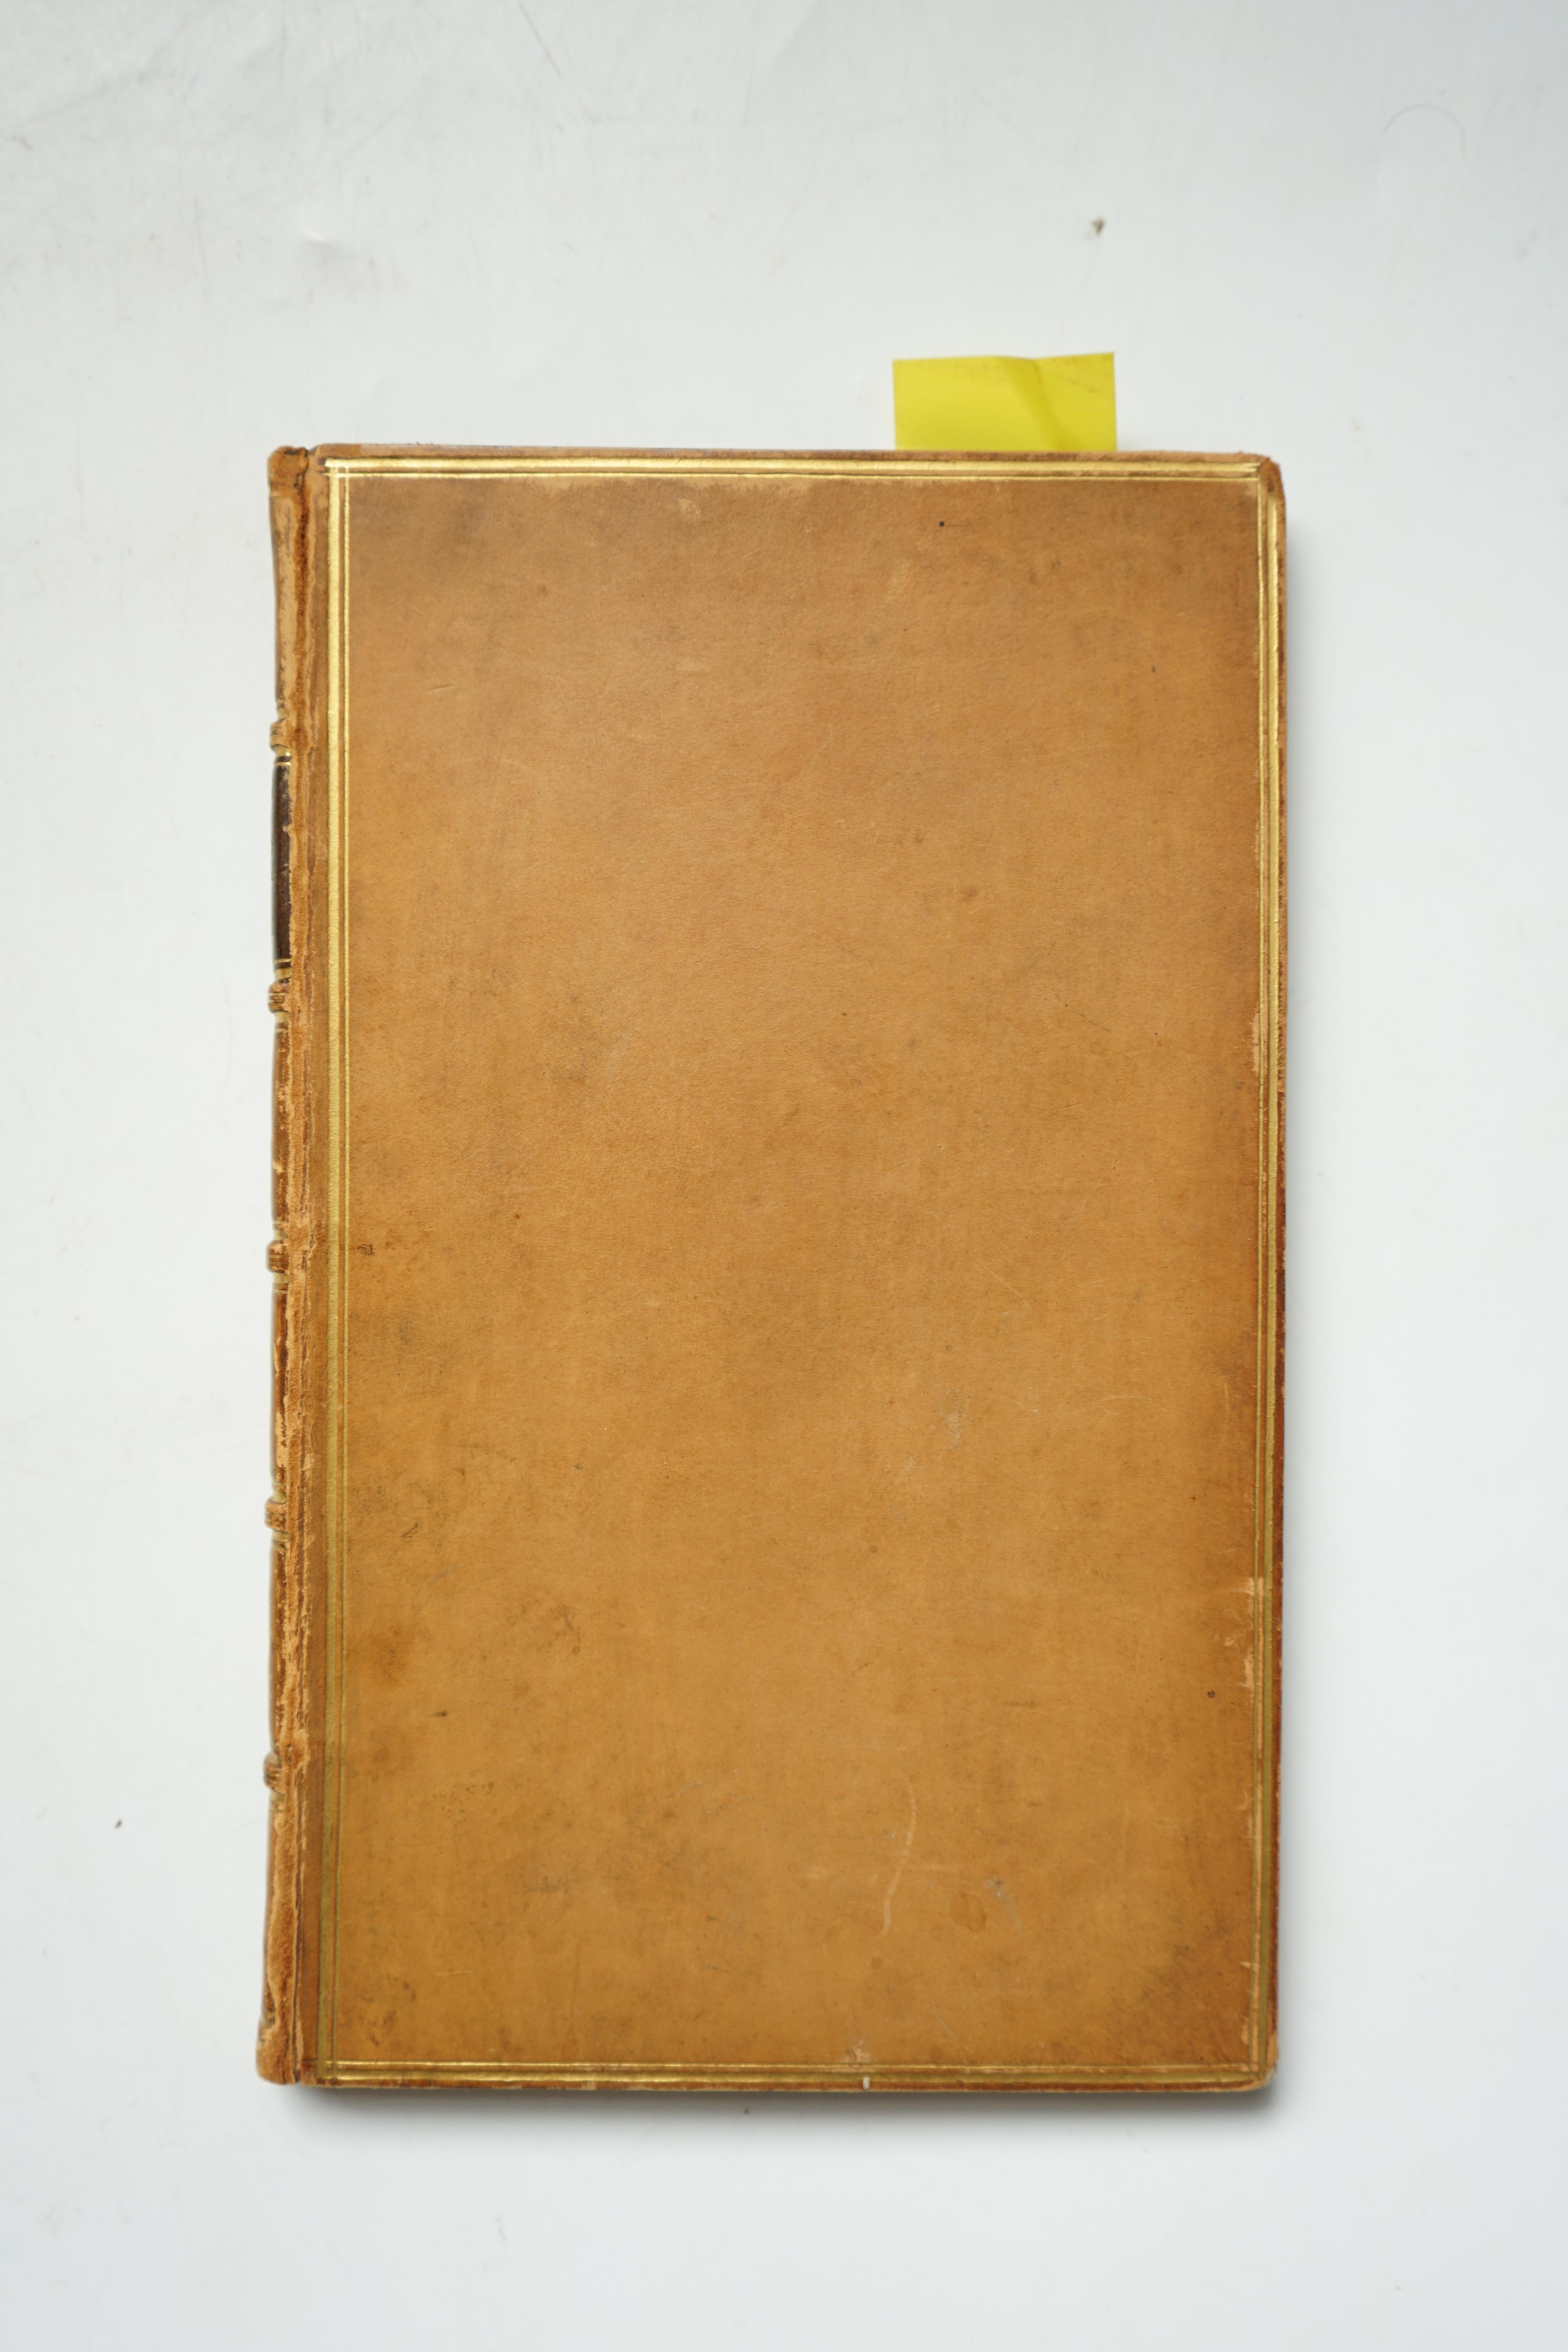 Byron, George Gordon Noel, Lord - English Bards and Scotch Reviewers . A Satire, 1st edition, with half title and preface, 12mo, calf, London, [1809].